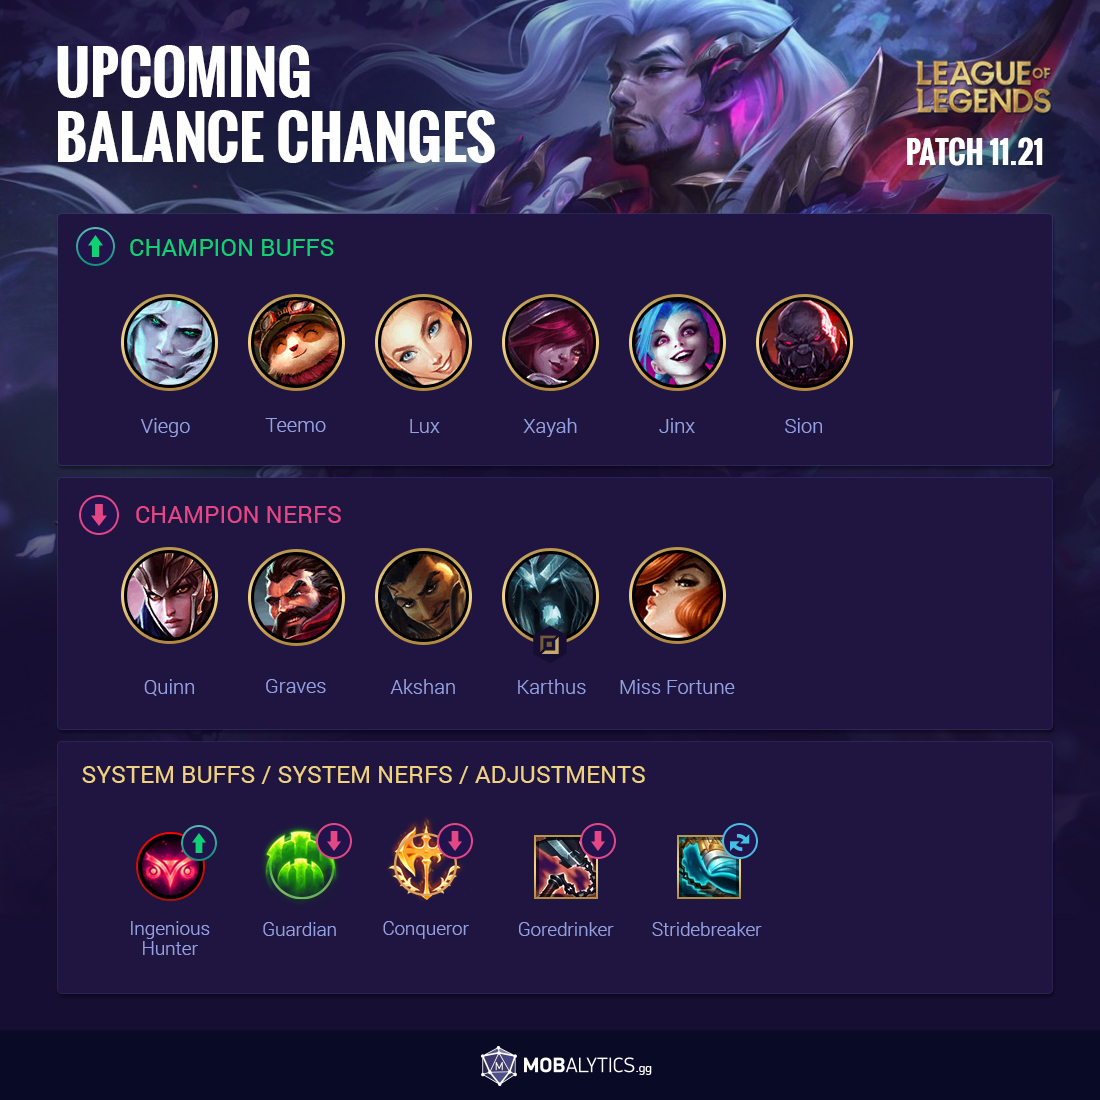 LoL patch 11.21 upcoming changes